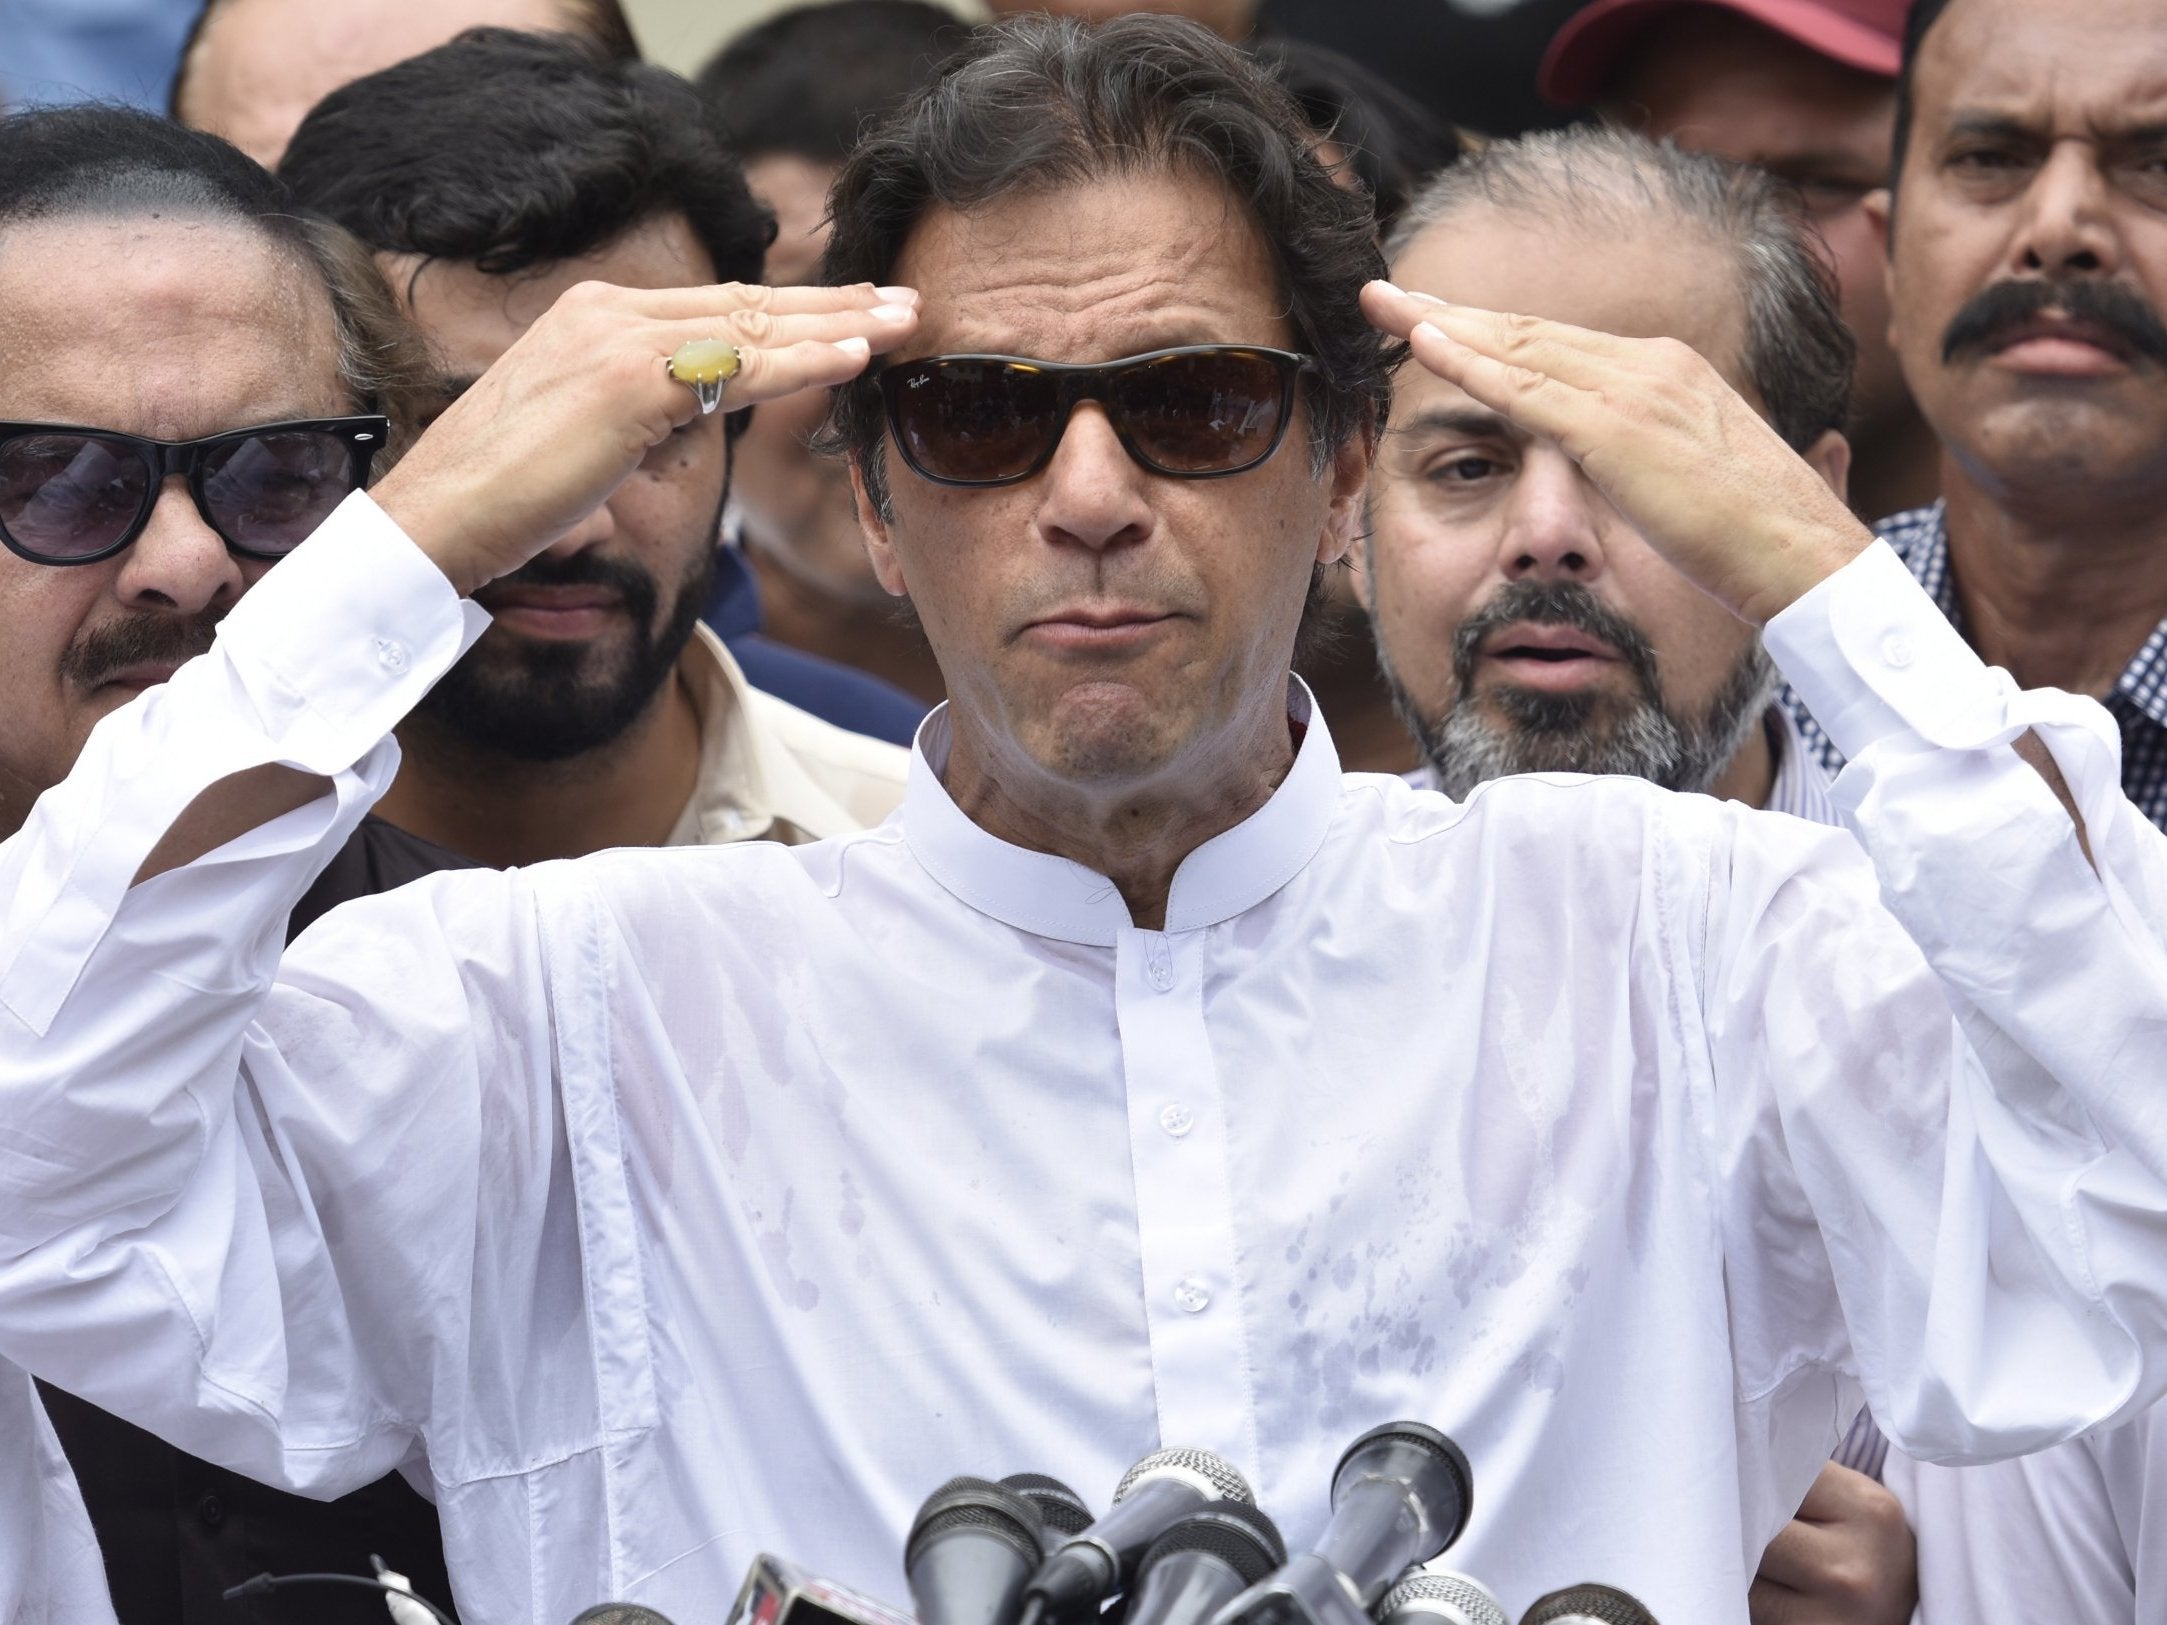 Former cricketer Imran Khan was confirmed as prime minister of Pakistan in August